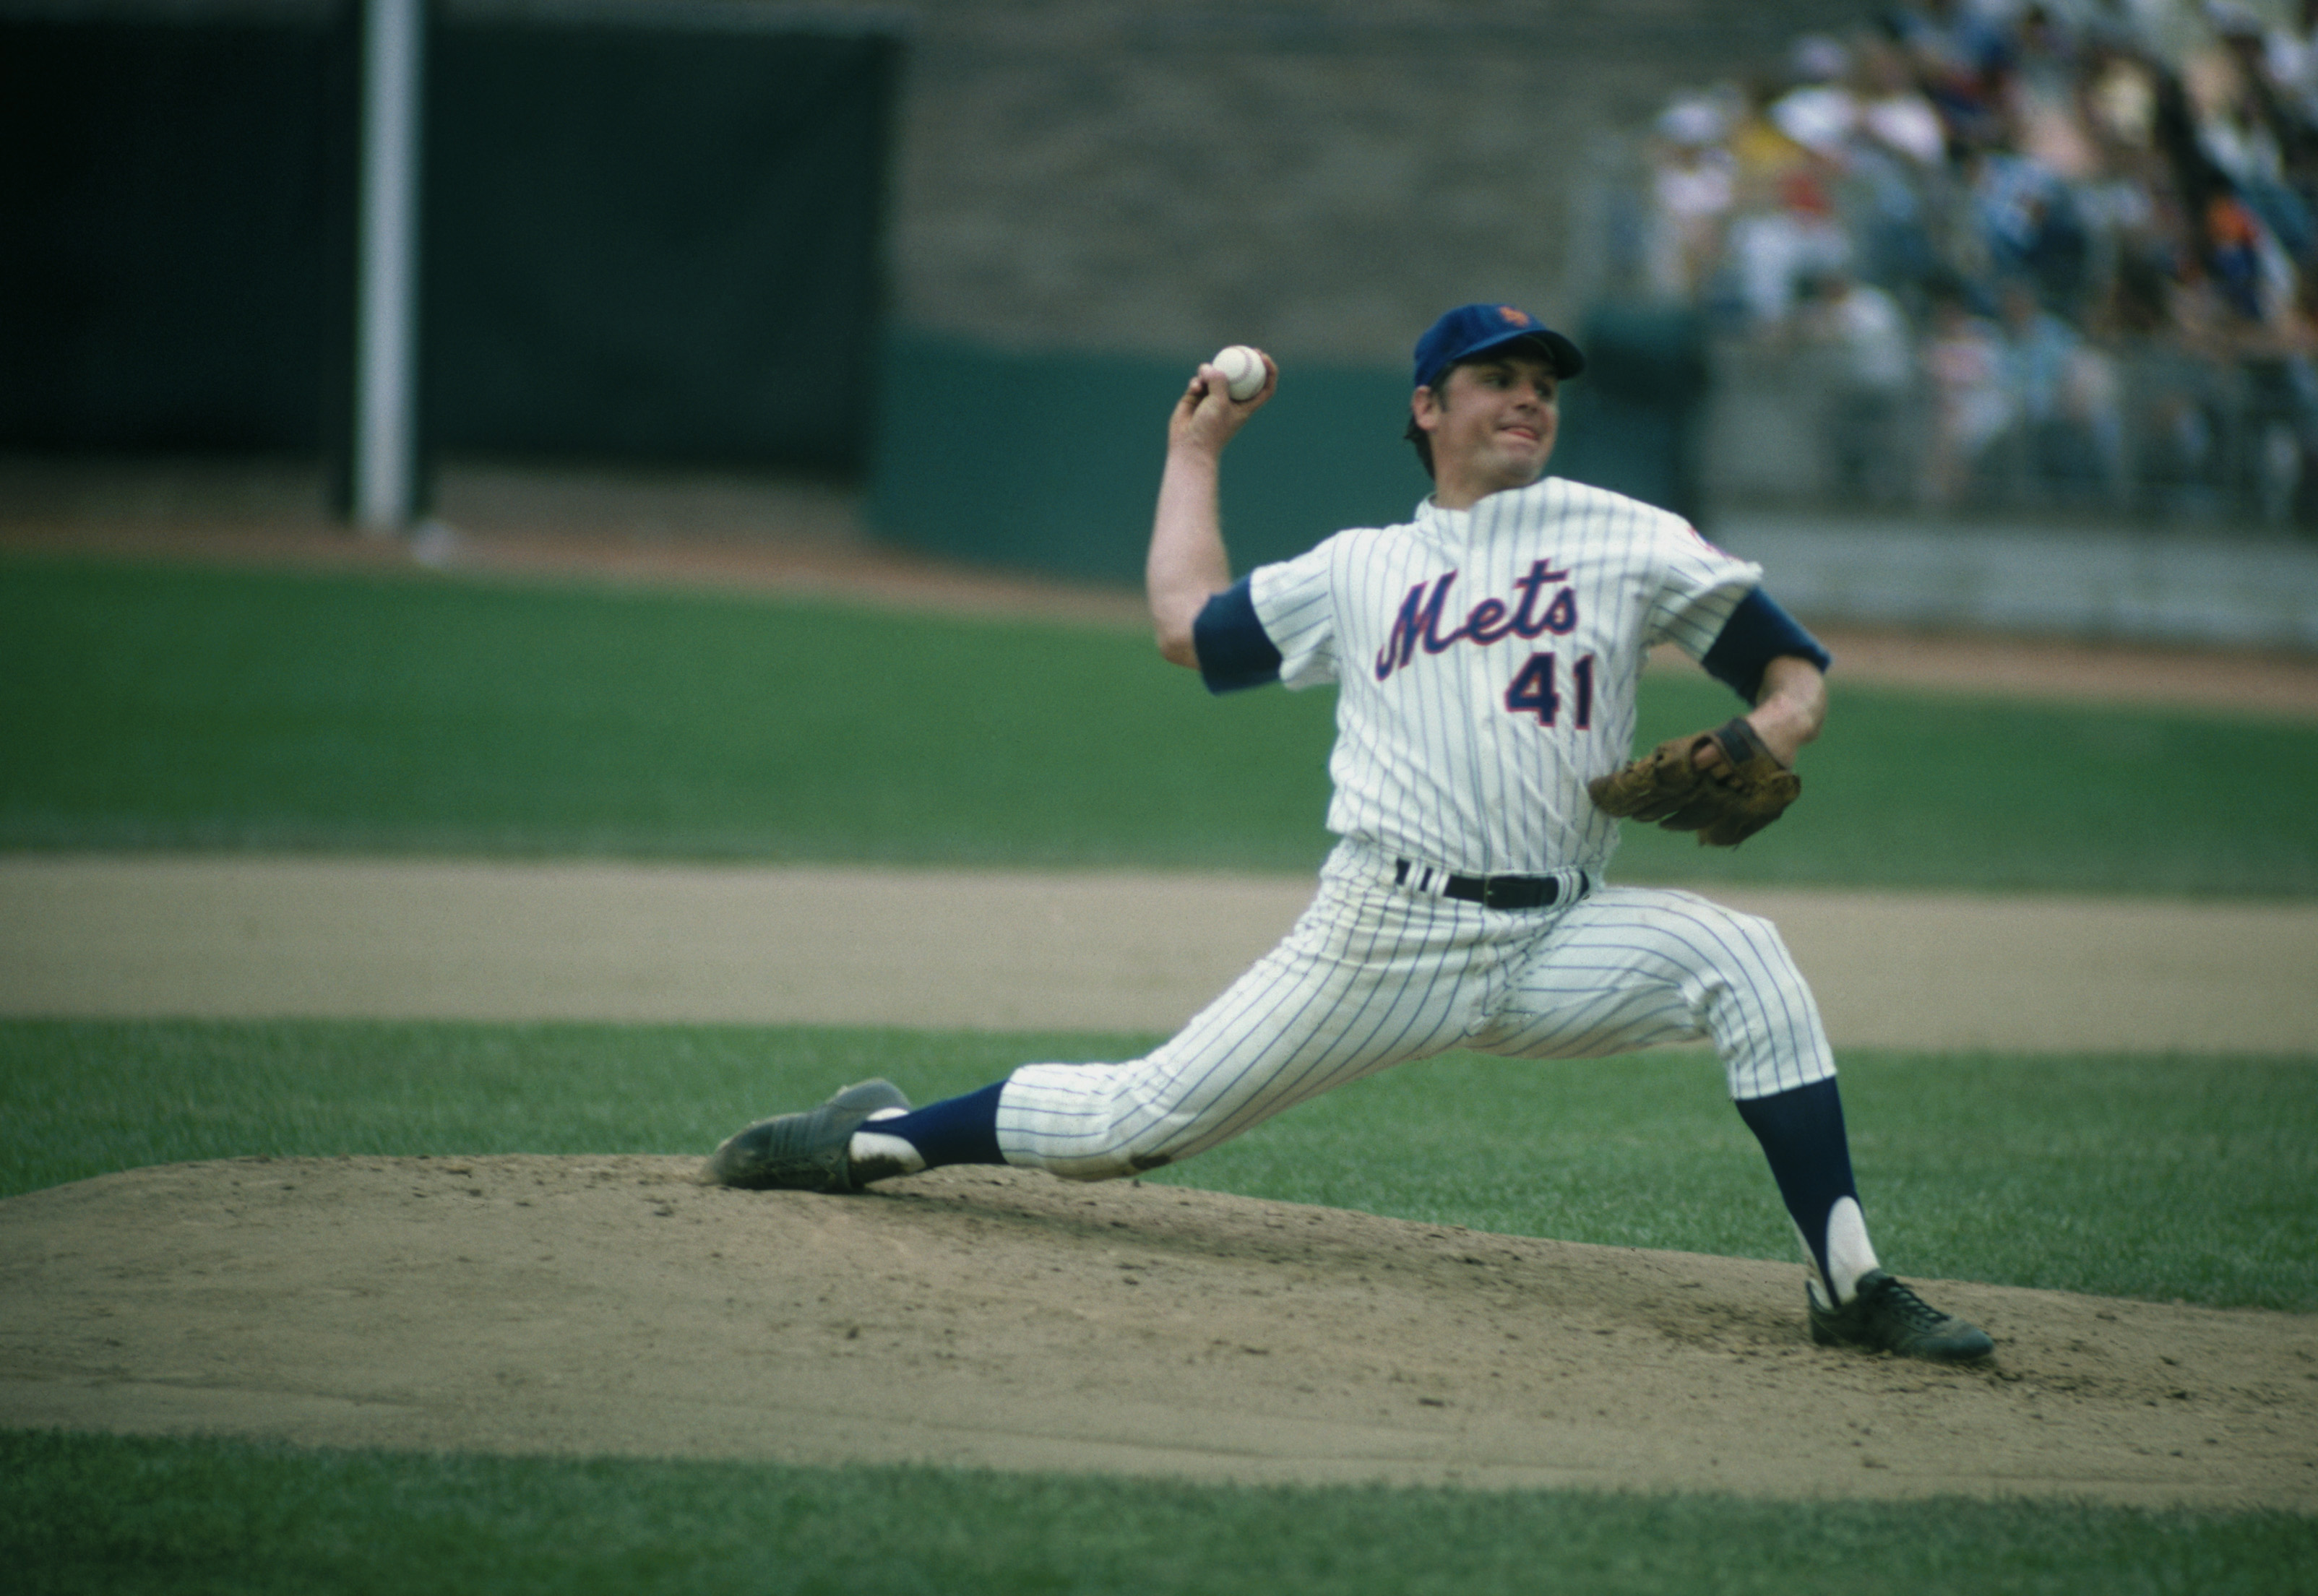 Mets to Honor Tom Seaver with 41 Patch on Sleeves for 2021